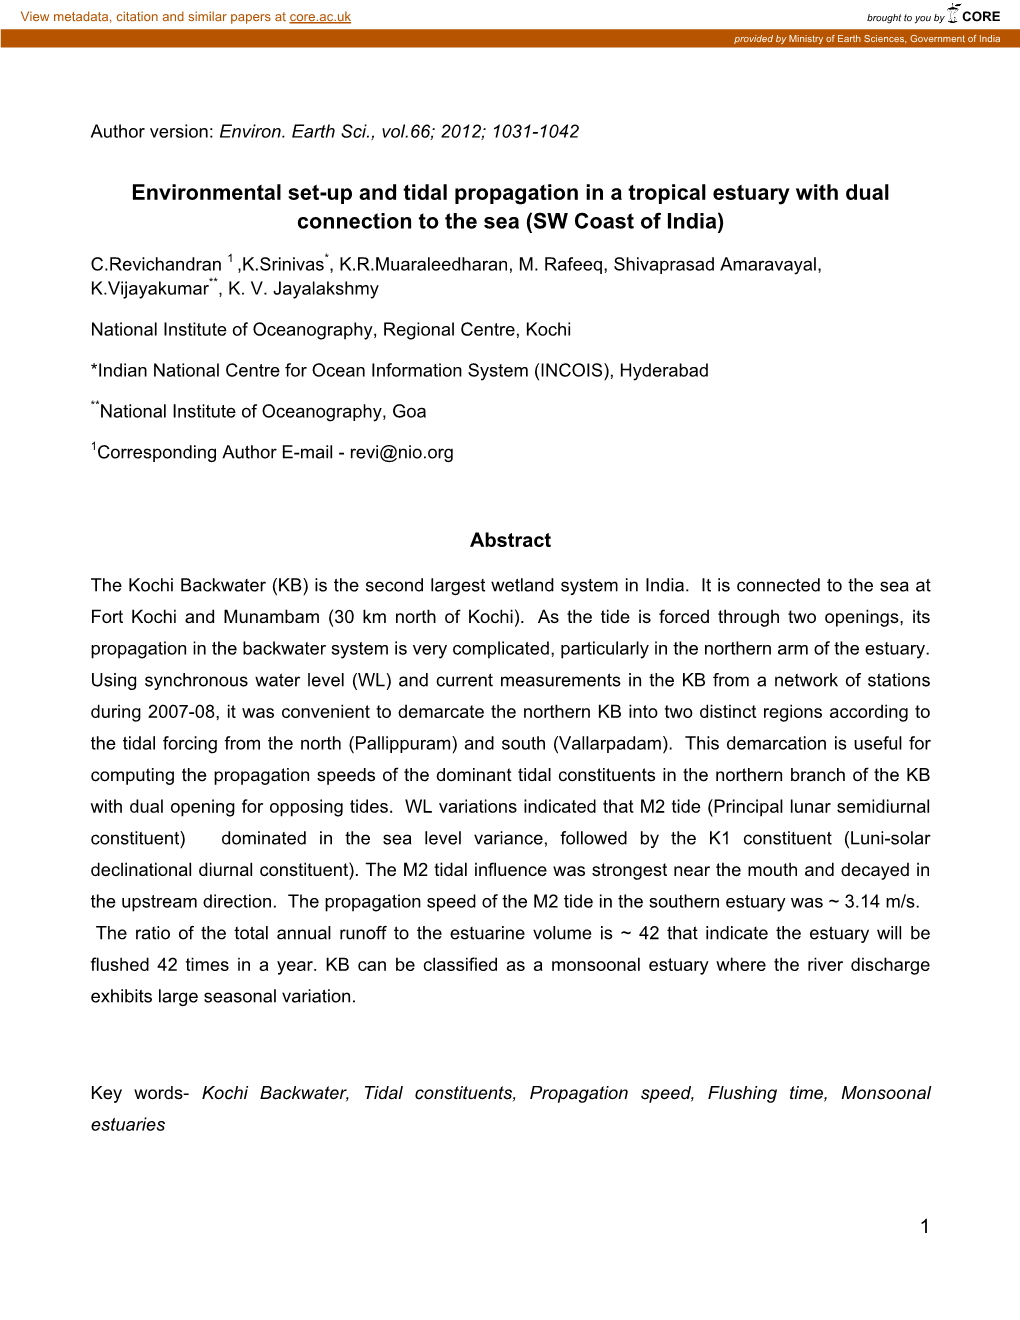 Environmental Set-Up and Tidal Propagation in a Tropical Estuary with Dual Connection to the Sea (SW Coast of India)